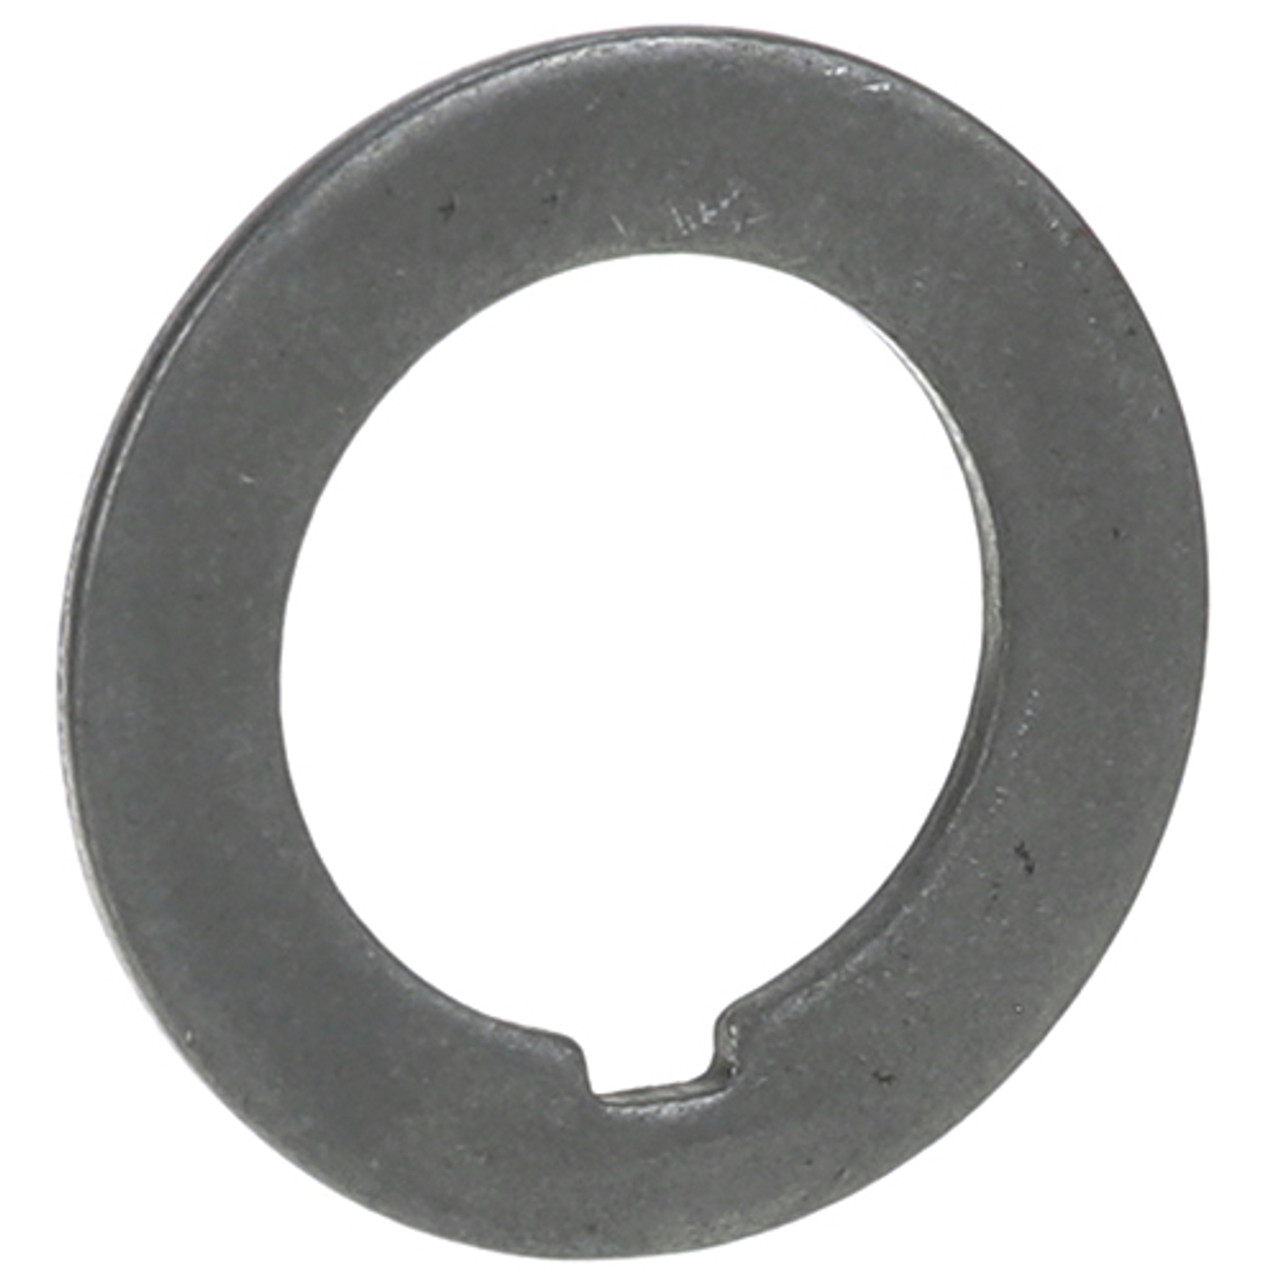 Washer - Pk/2, .630 Id X 1 Od X .0625 - Replacement Part For Hobart 00-012754